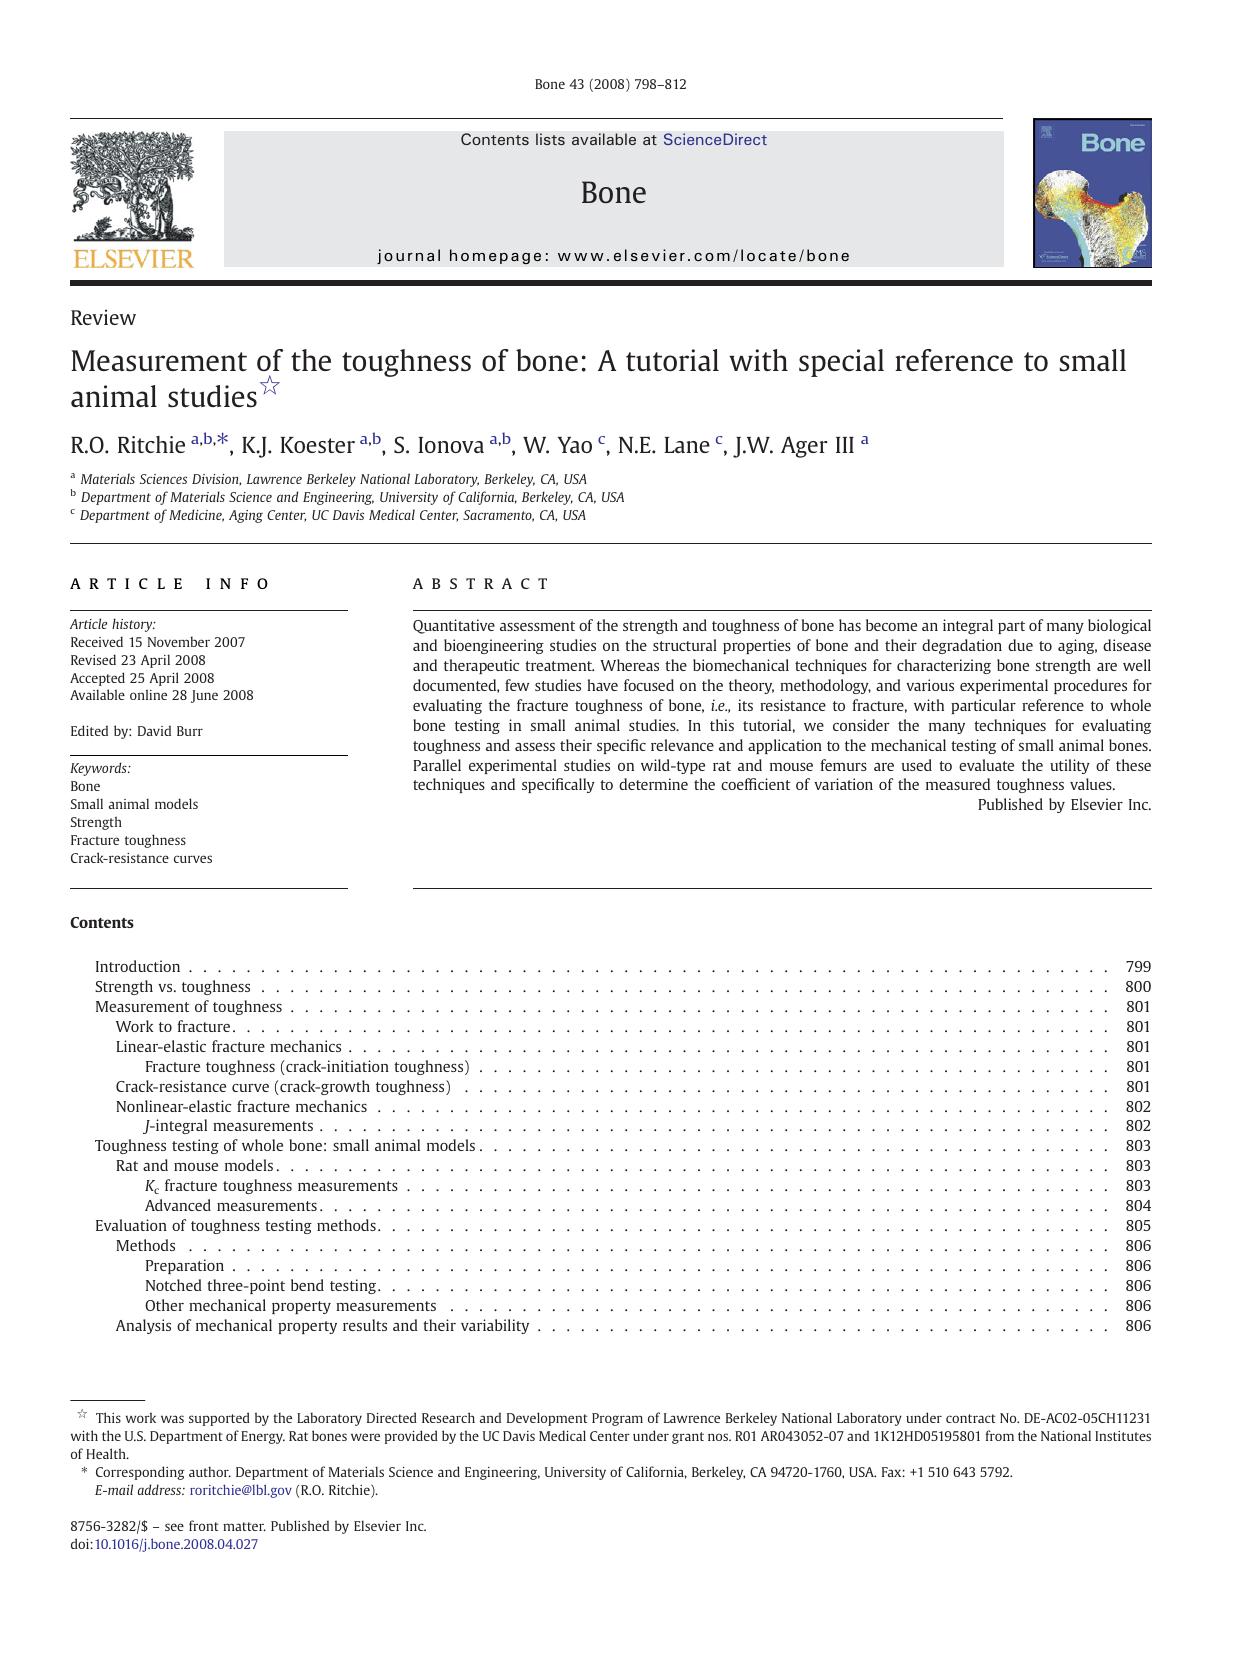 Measurement of the toughness of bone: A tutorial with special reference to small animal studies